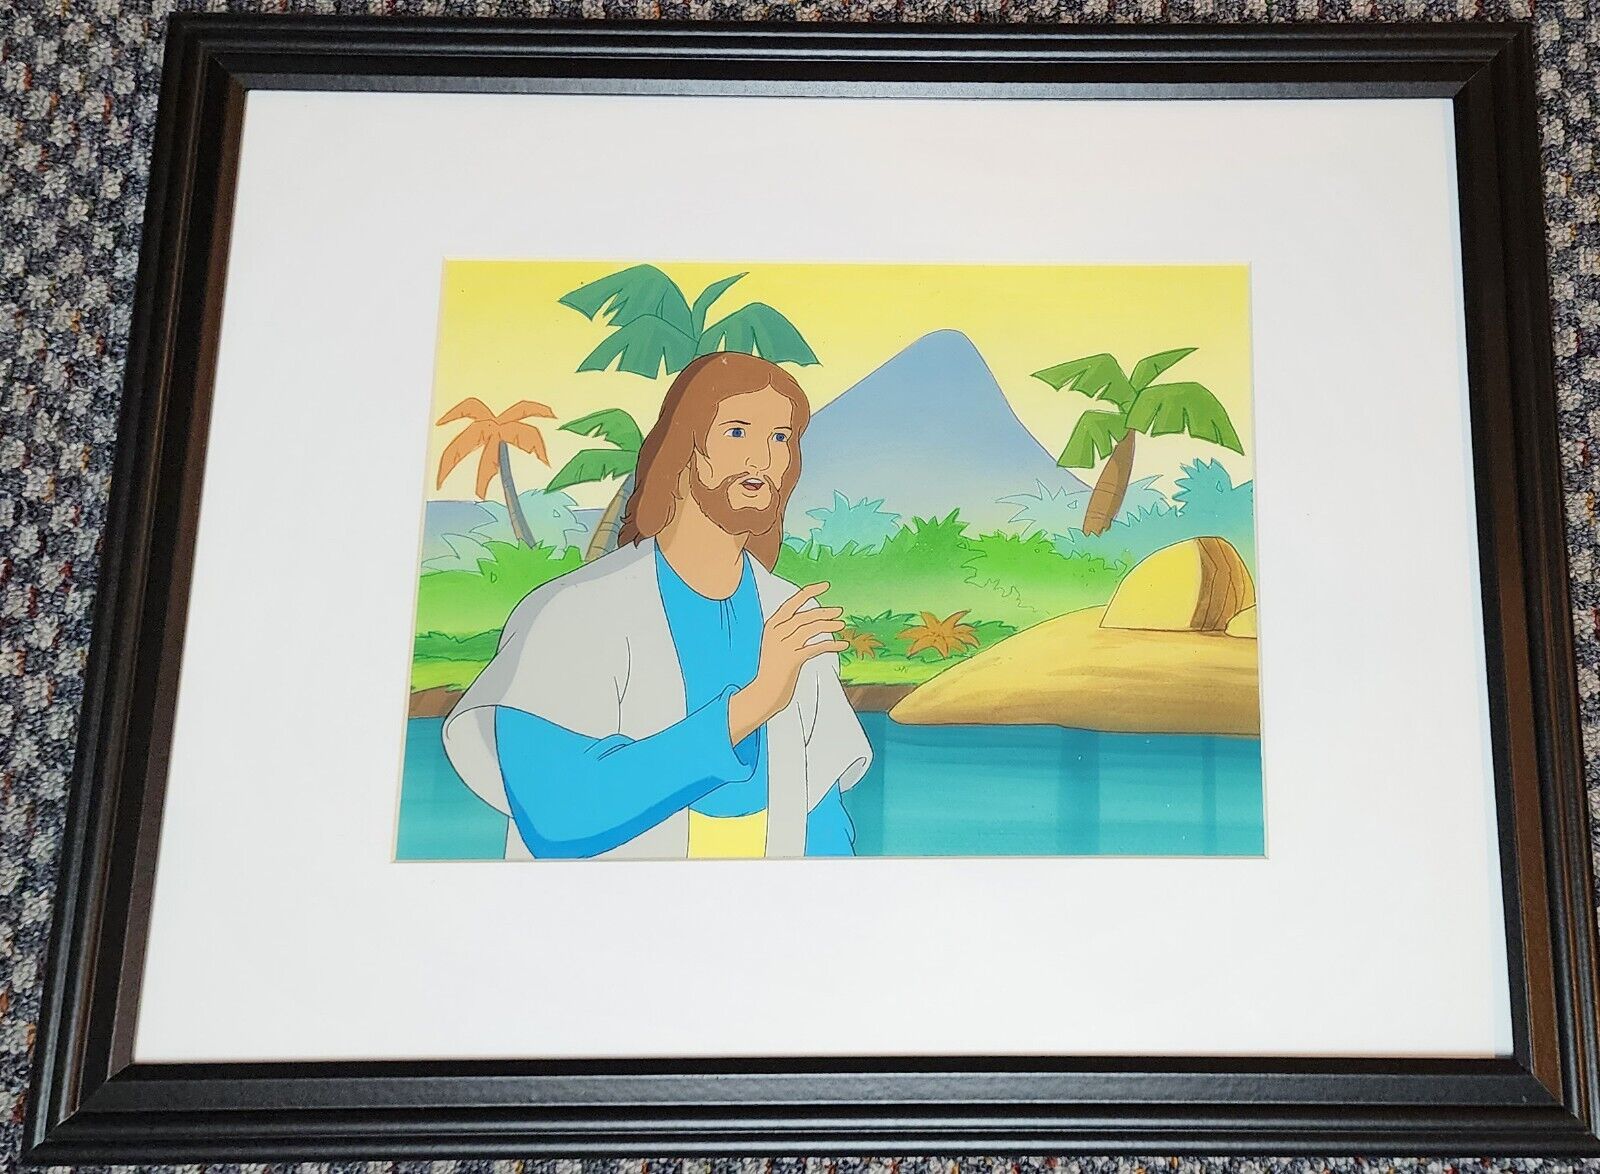 GREATEST HEROS AND LEGENDS OF THE BIBLE PRODUCTION CEL OF  JESUS ON OBG FRAMED